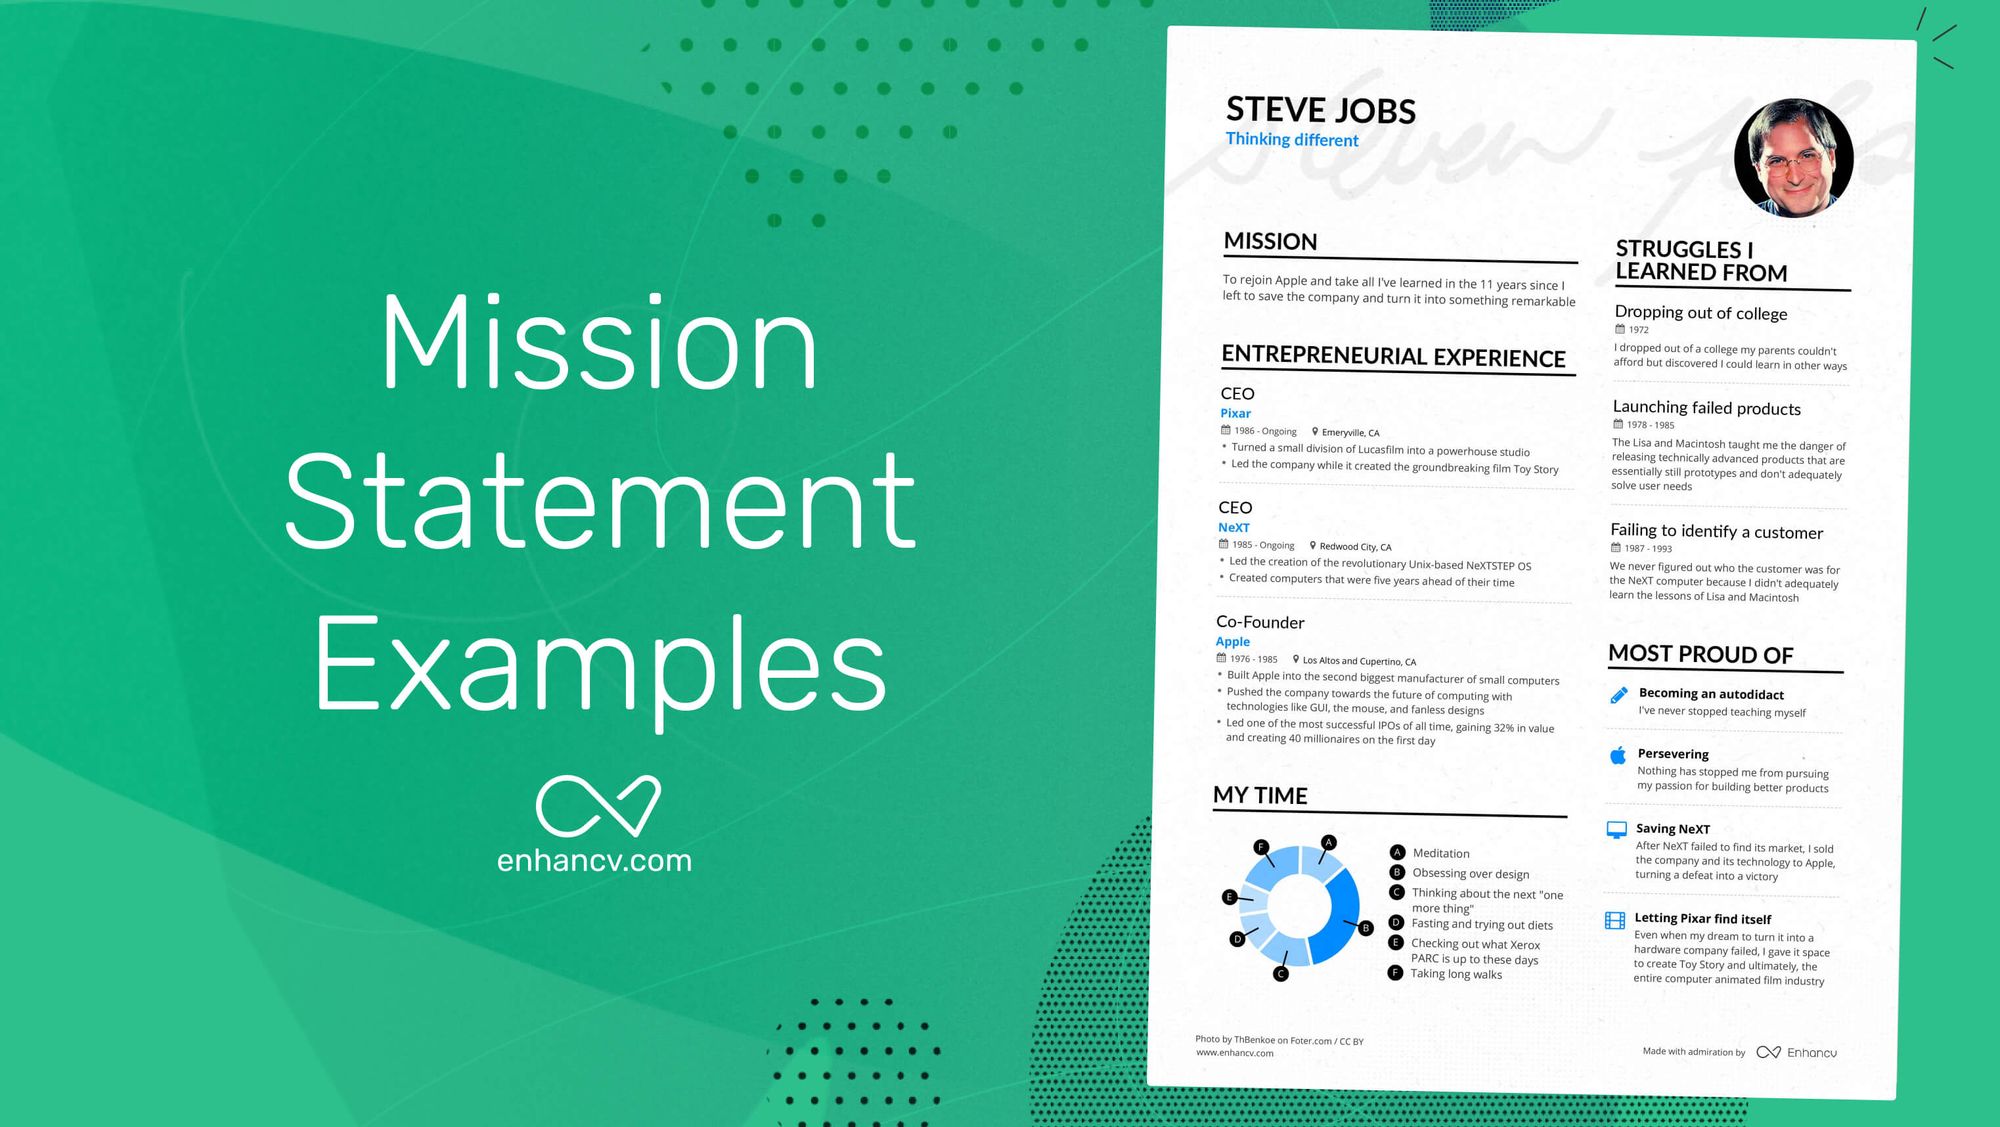 Your Personal Mission Statement Guide: Why and How to Write One (With 10+ Examples and 3 Templates)